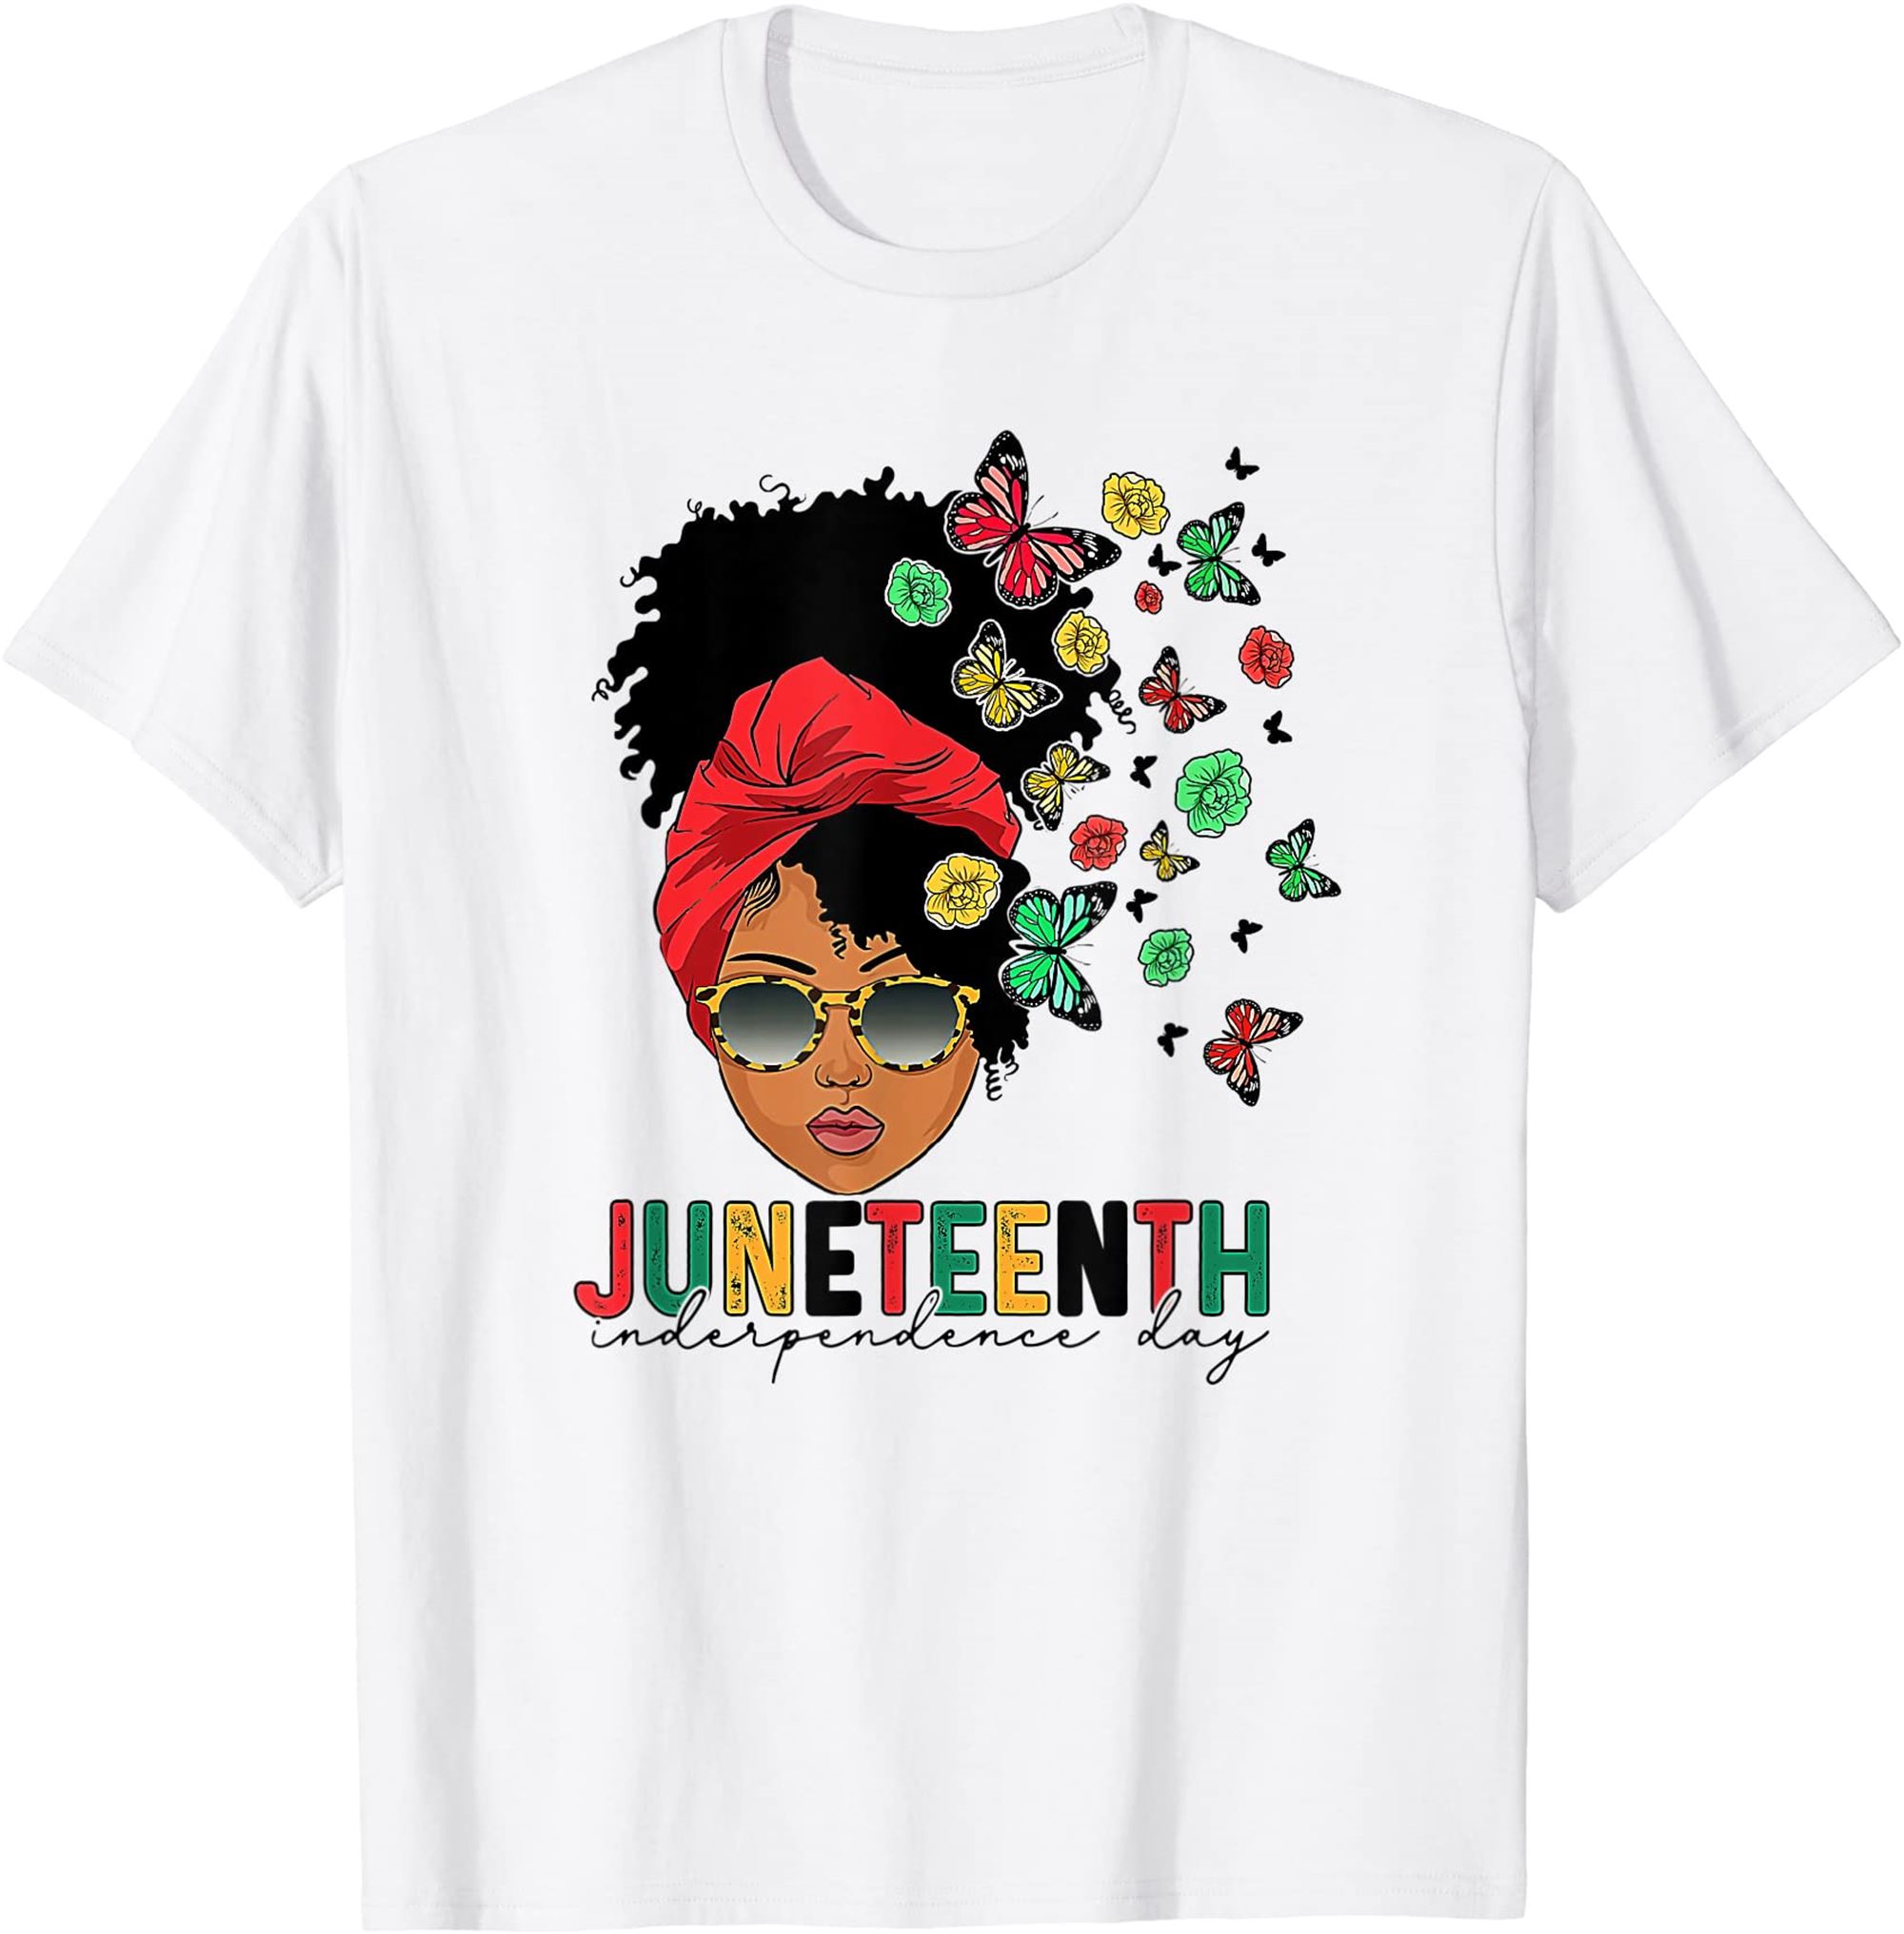 Juneteenth Is My Independence Day Black Queen And Butterfly T-shirt Plus Size Up To 5xl